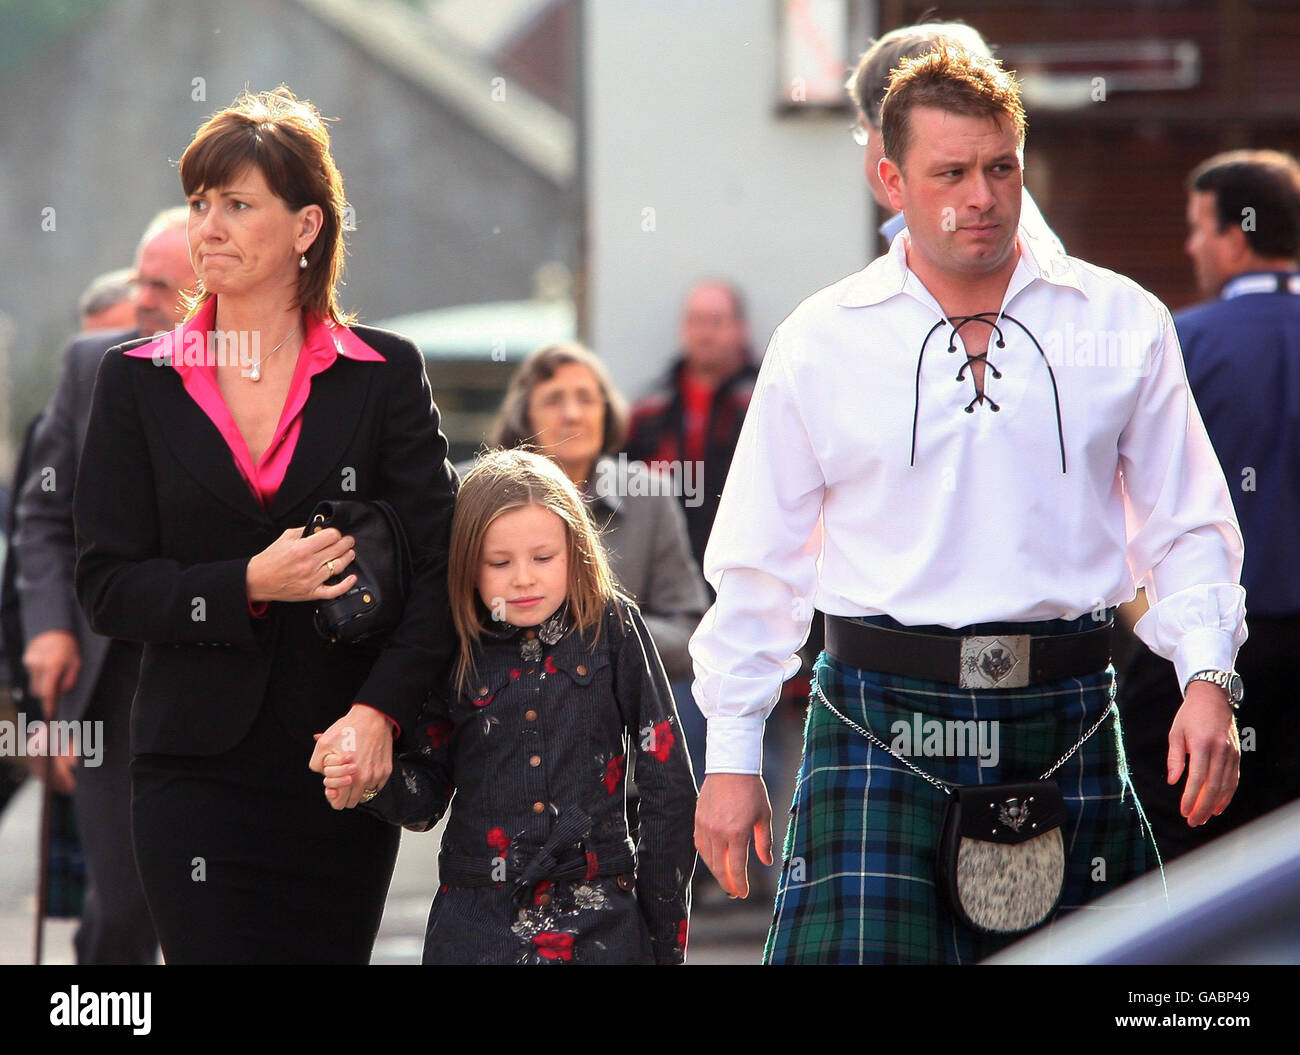 Colin McRae's brother Stuart McRae is pictured with Alison McRae and her daughter Holliew, as they arrive for the Service of Celebration for her husband Colin McRae and their son Johnny McRae taking place at St Nicholas Church, High Street in Lanark. Stock Photo